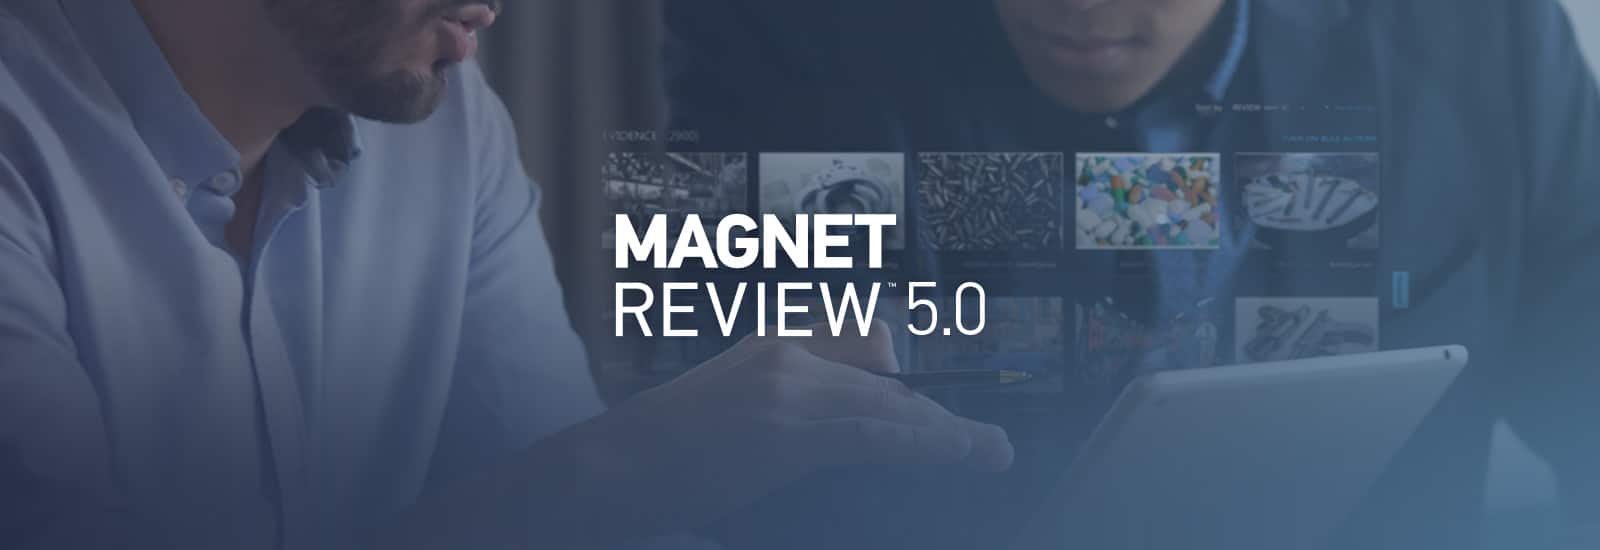 Magnet REVIEW 5.0